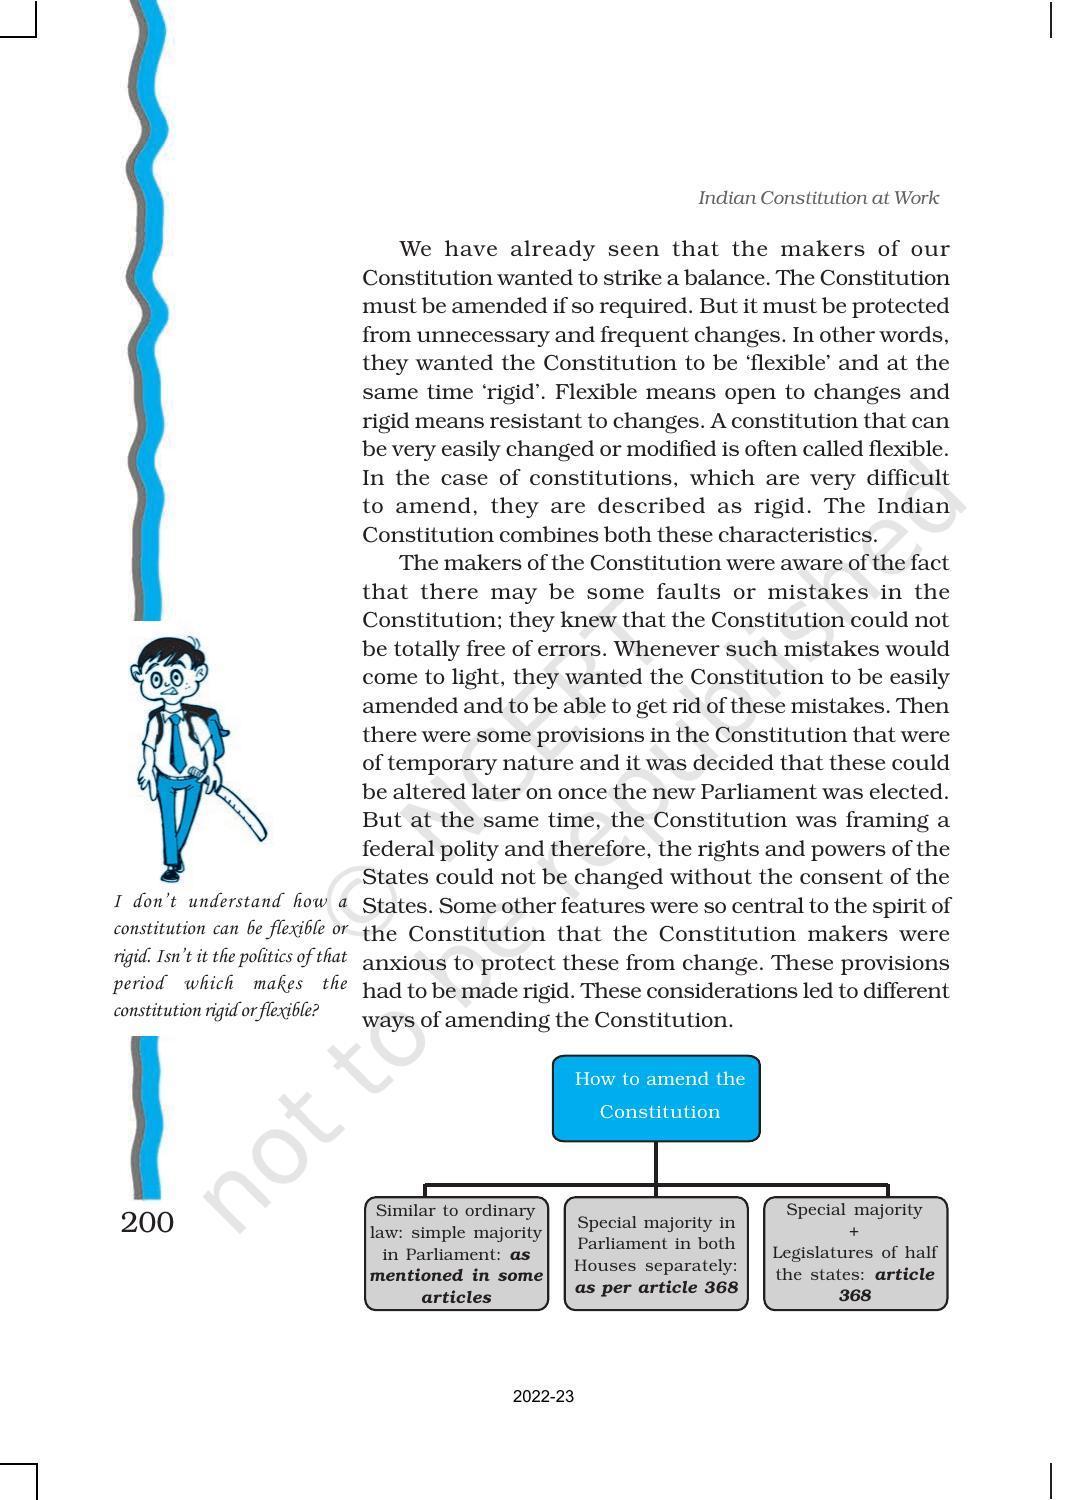 NCERT Book for Class 11 Political Science (Indian Constitution at Work) Chapter 9 Constitution as a Living Document - Page 5